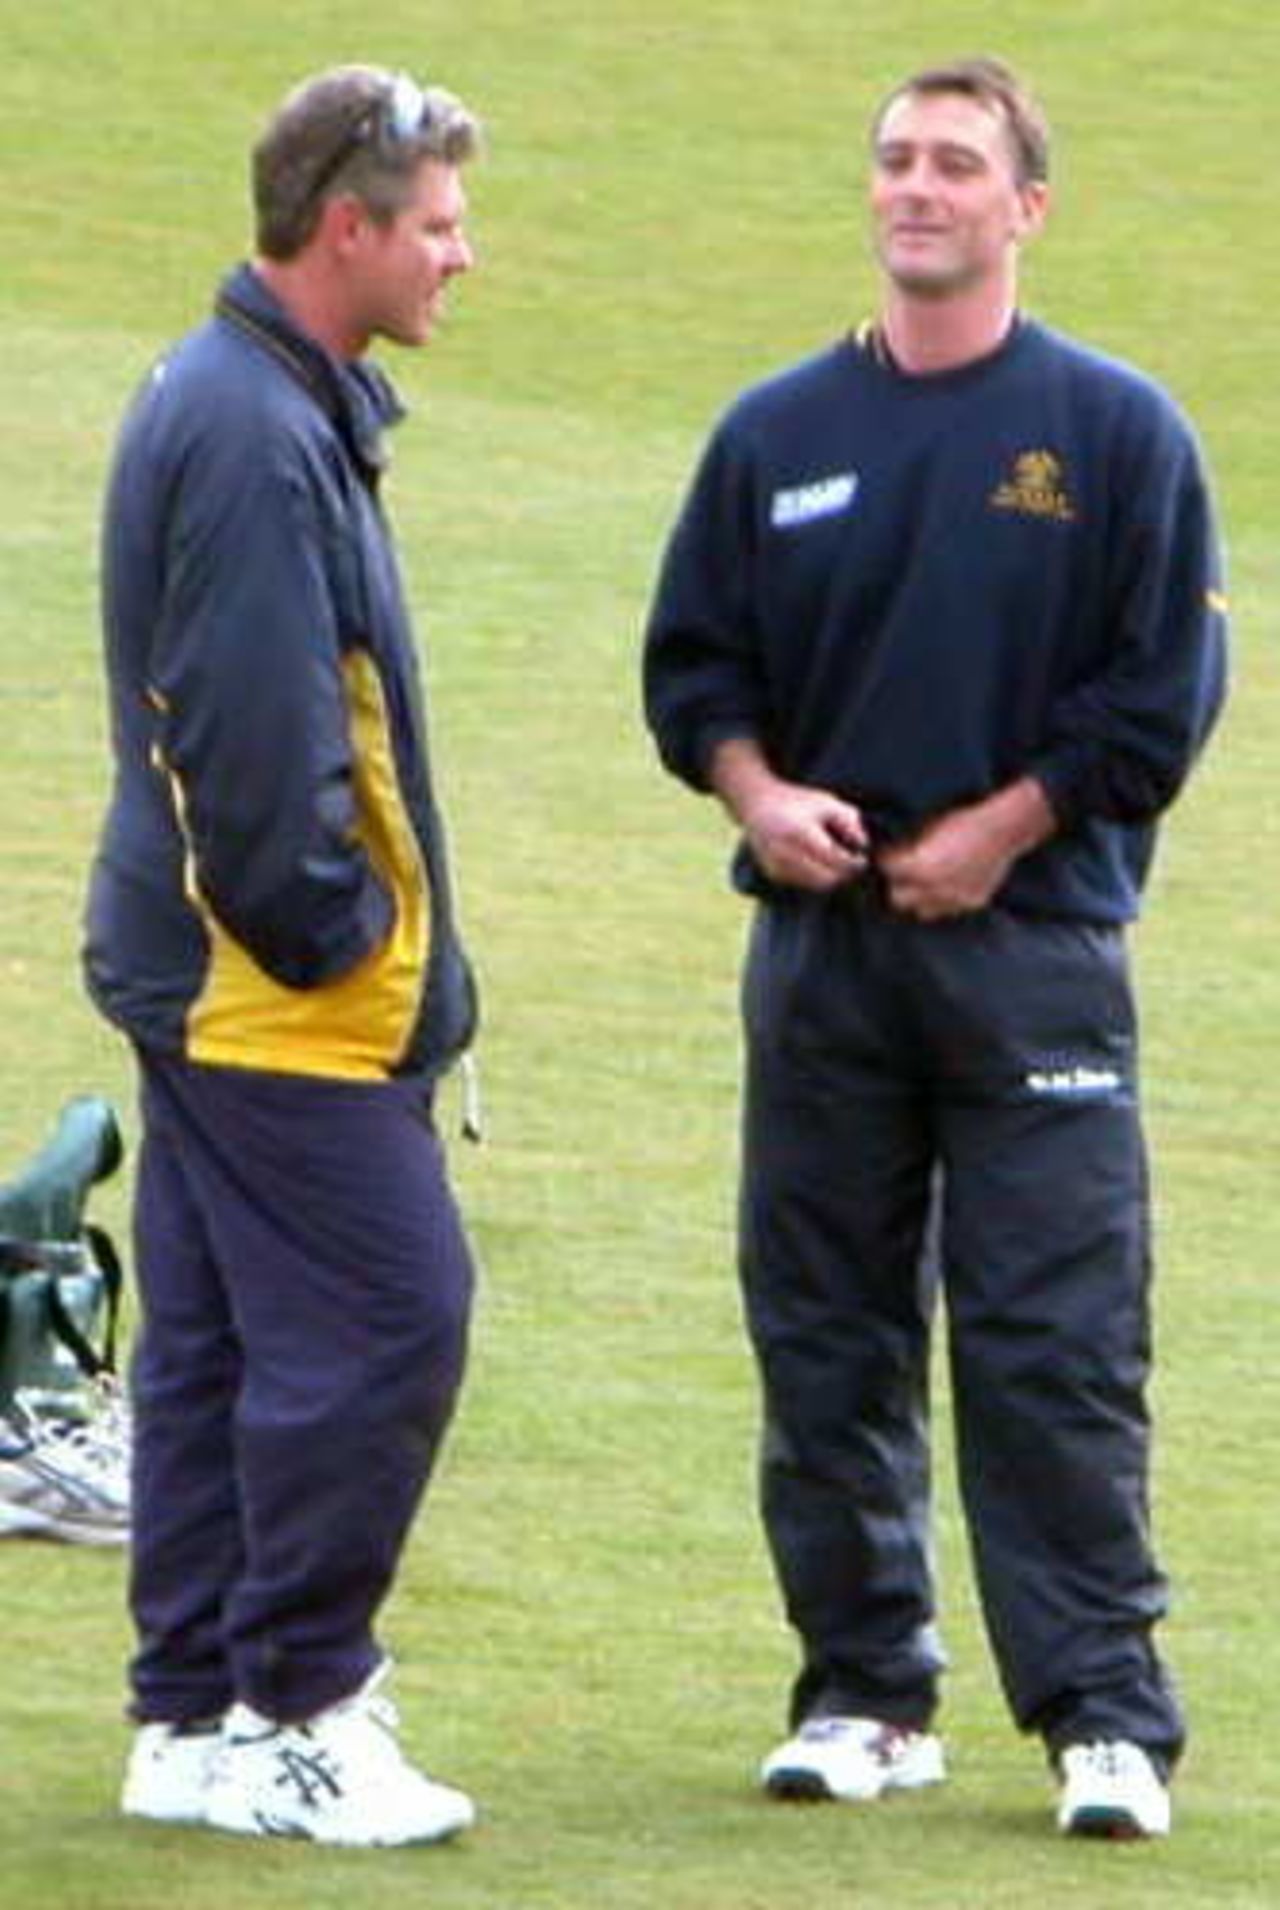 Robin Smith and Surrey's Graham Thorpe compare notes